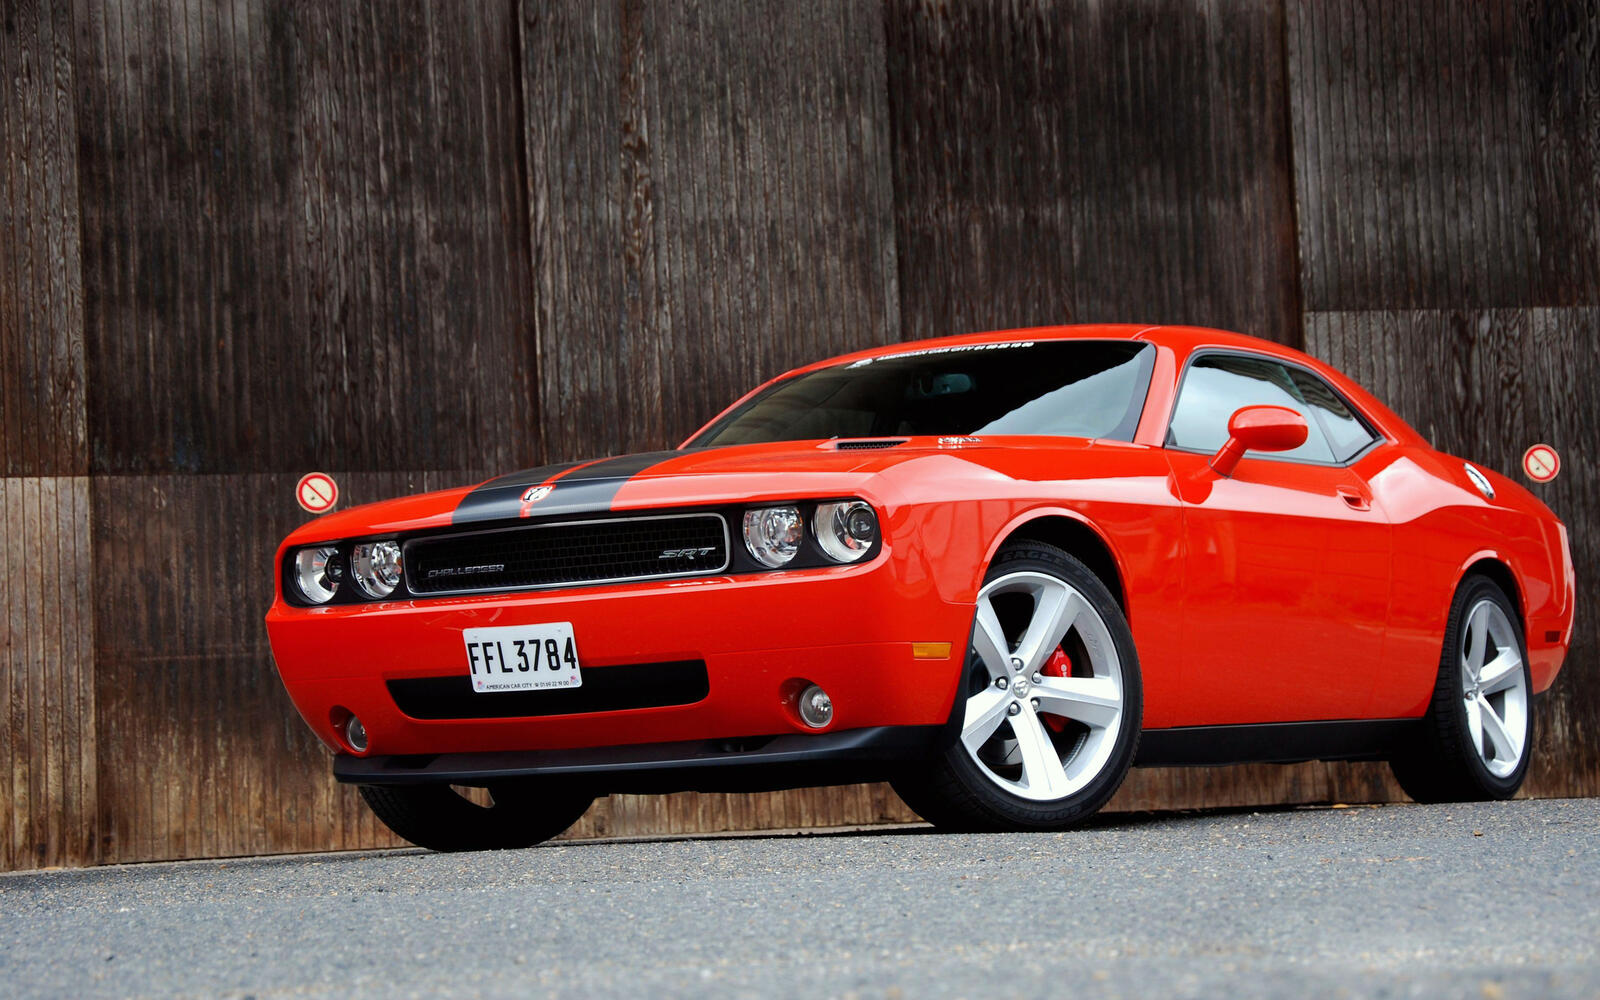 Wallpapers Dodge Challenger Muscle Car on the desktop